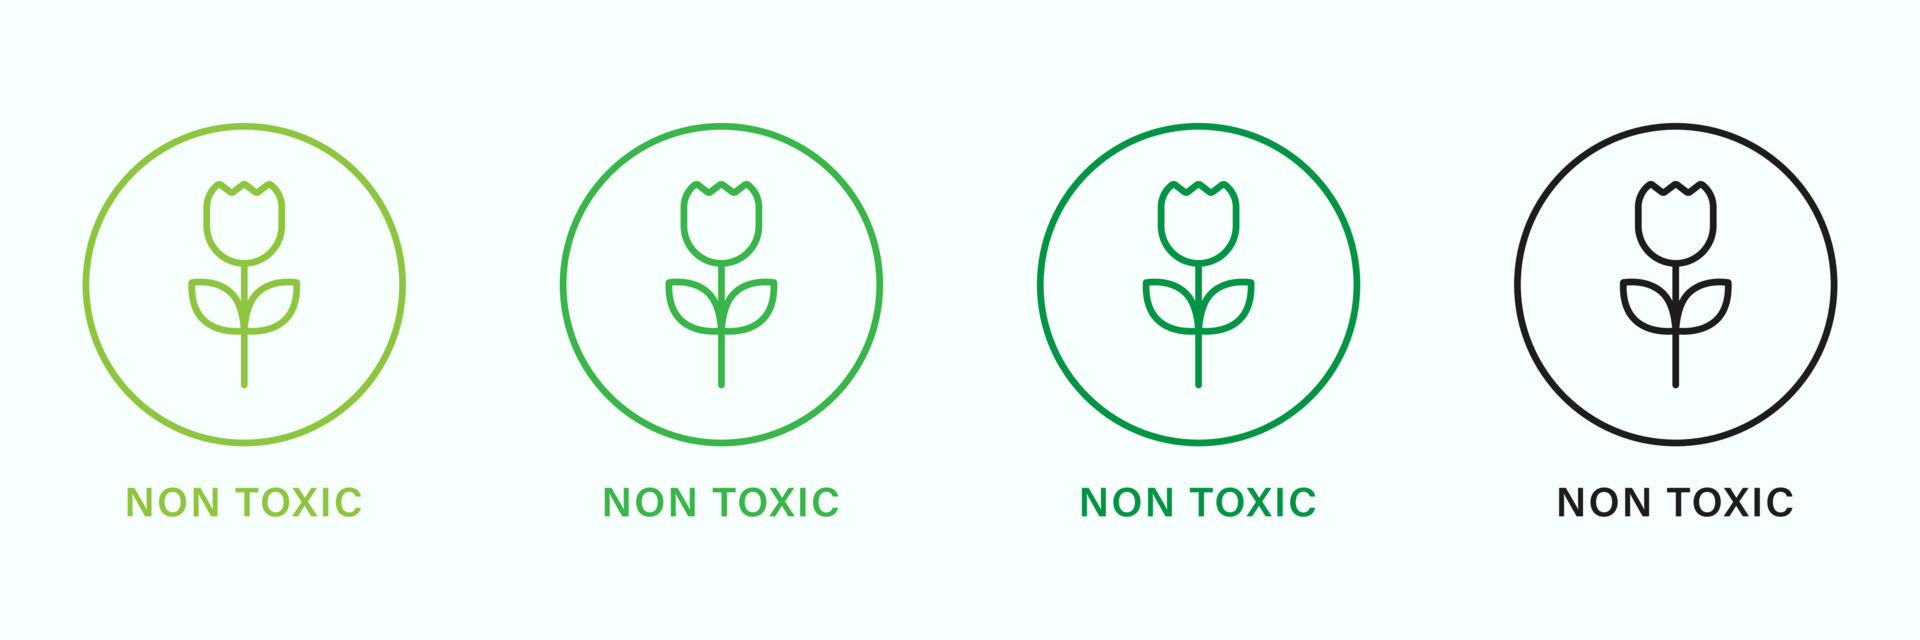 https://static.vecteezy.com/system/resources/previews/021/626/862/original/non-toxic-product-line-green-and-black-icons-set-no-toxin-chemical-safety-product-guarantee-outline-pictogram-free-toxic-certified-organic-symbol-nontoxic-seal-isolated-illustration-vector.jpg